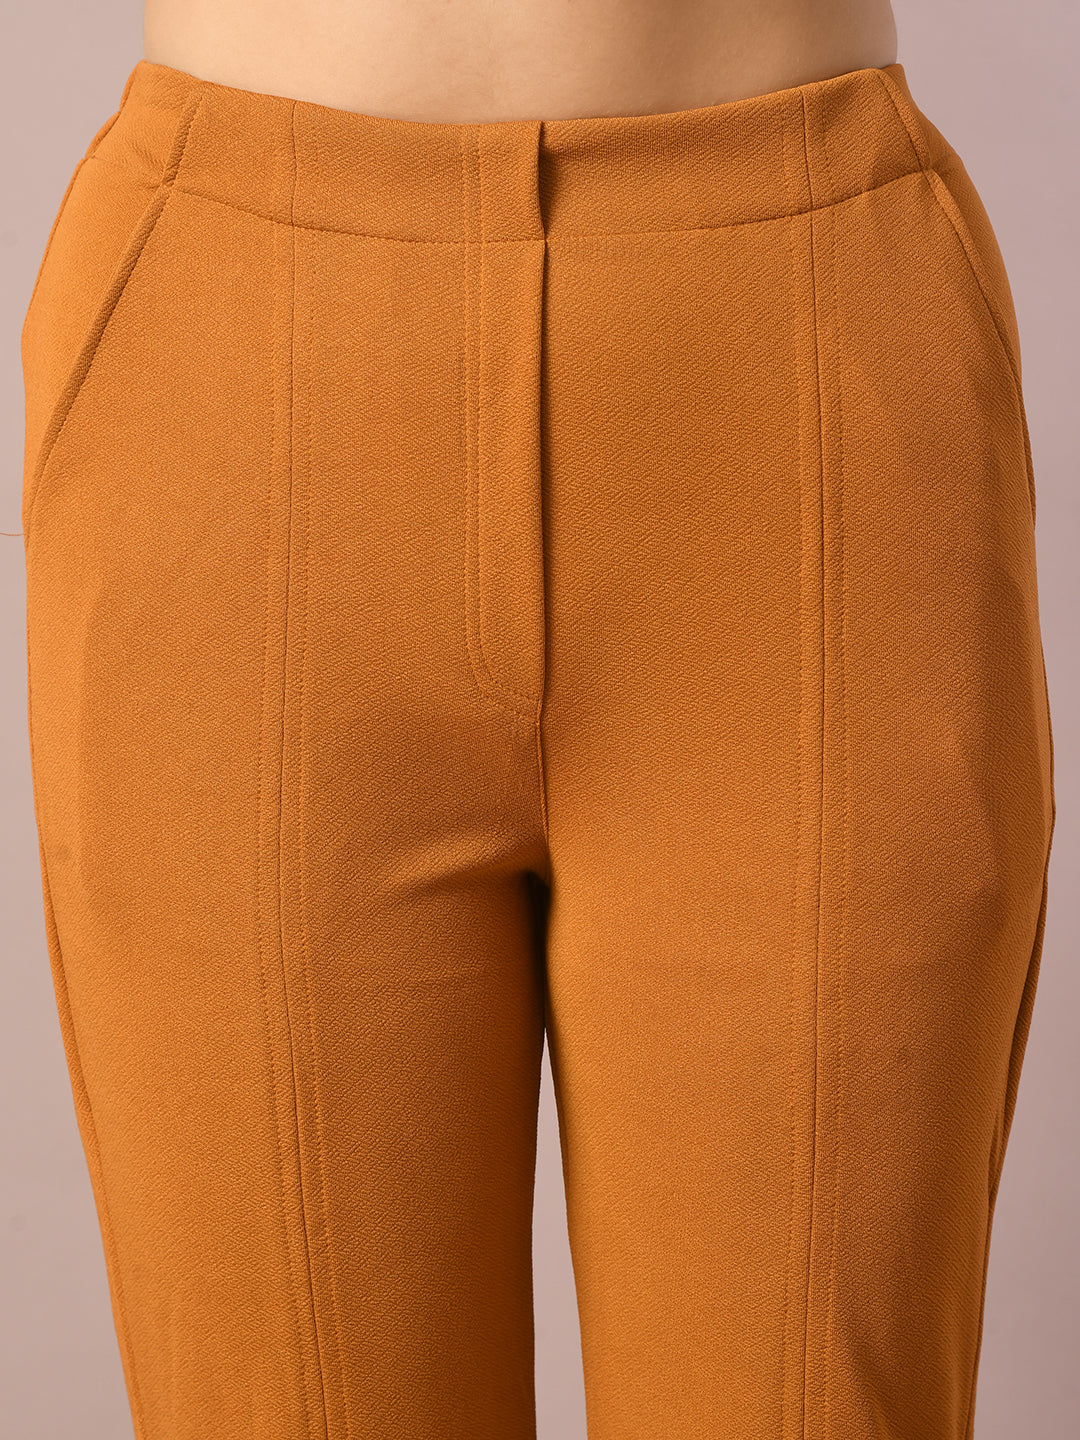 Women's  Mustard Solid Party Parallel Trousers   - Myshka